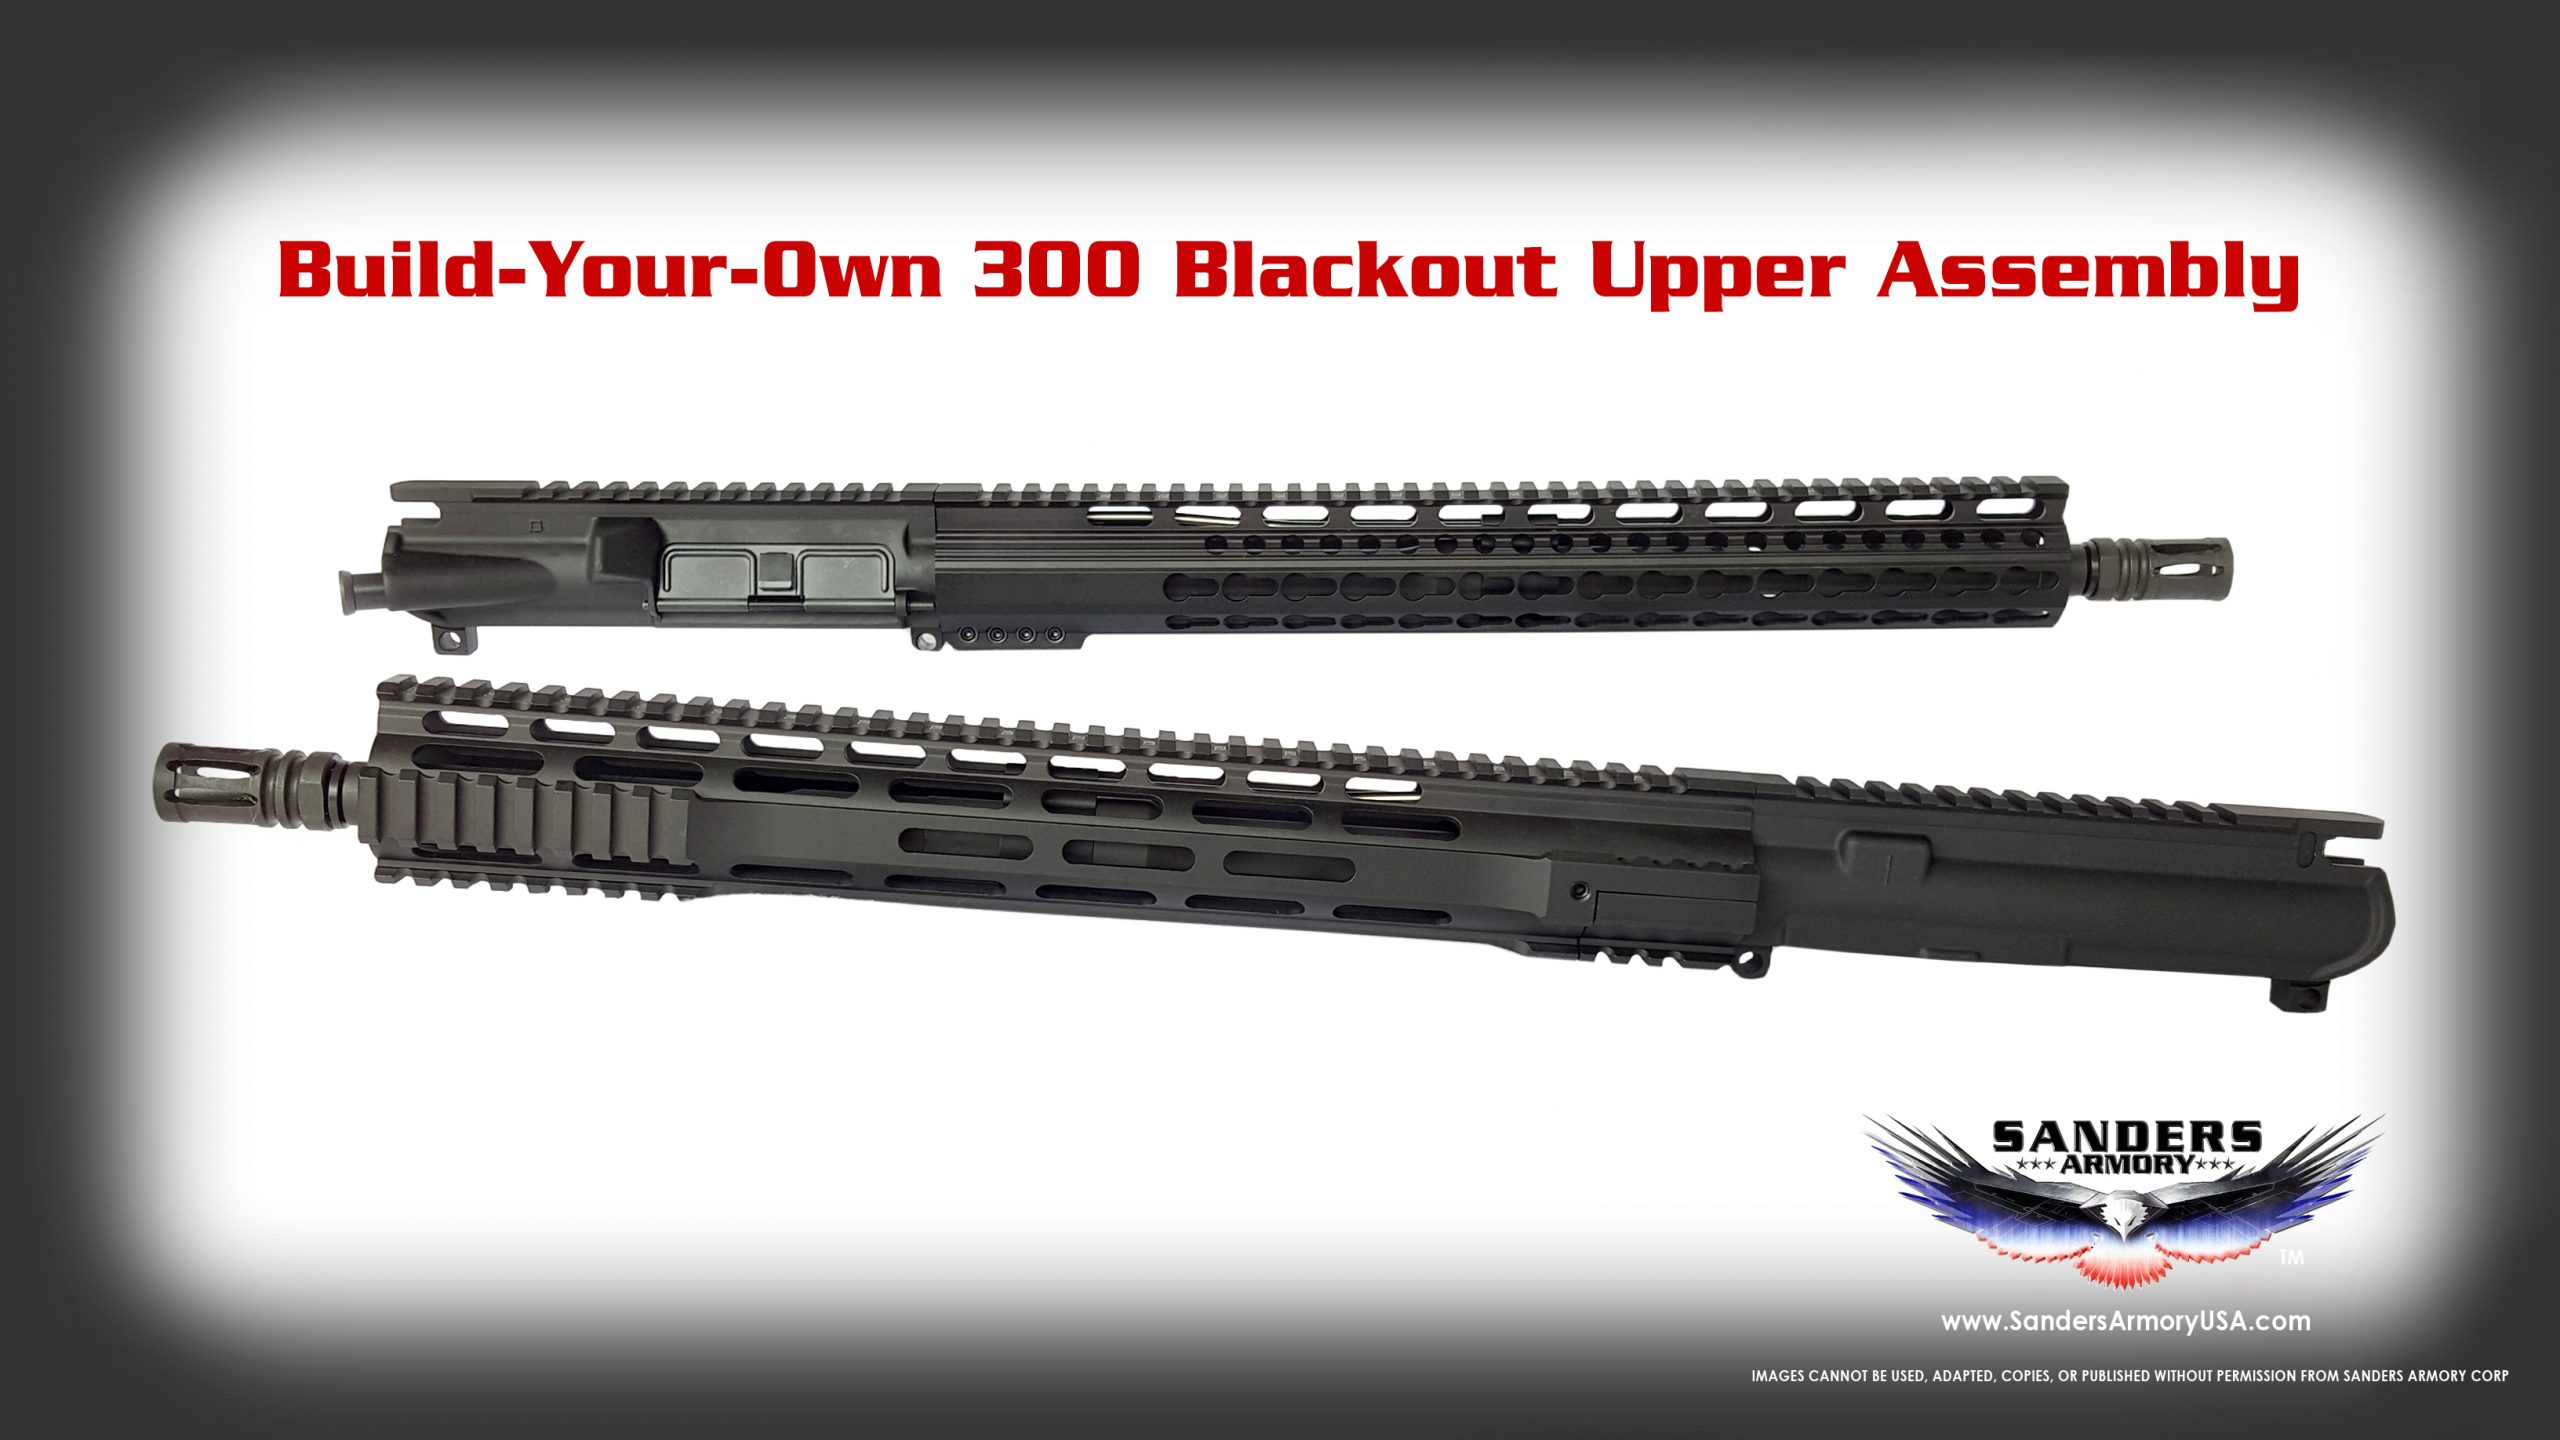 Sanders Armory Build Your Own 300 Blackout Upper Assembly